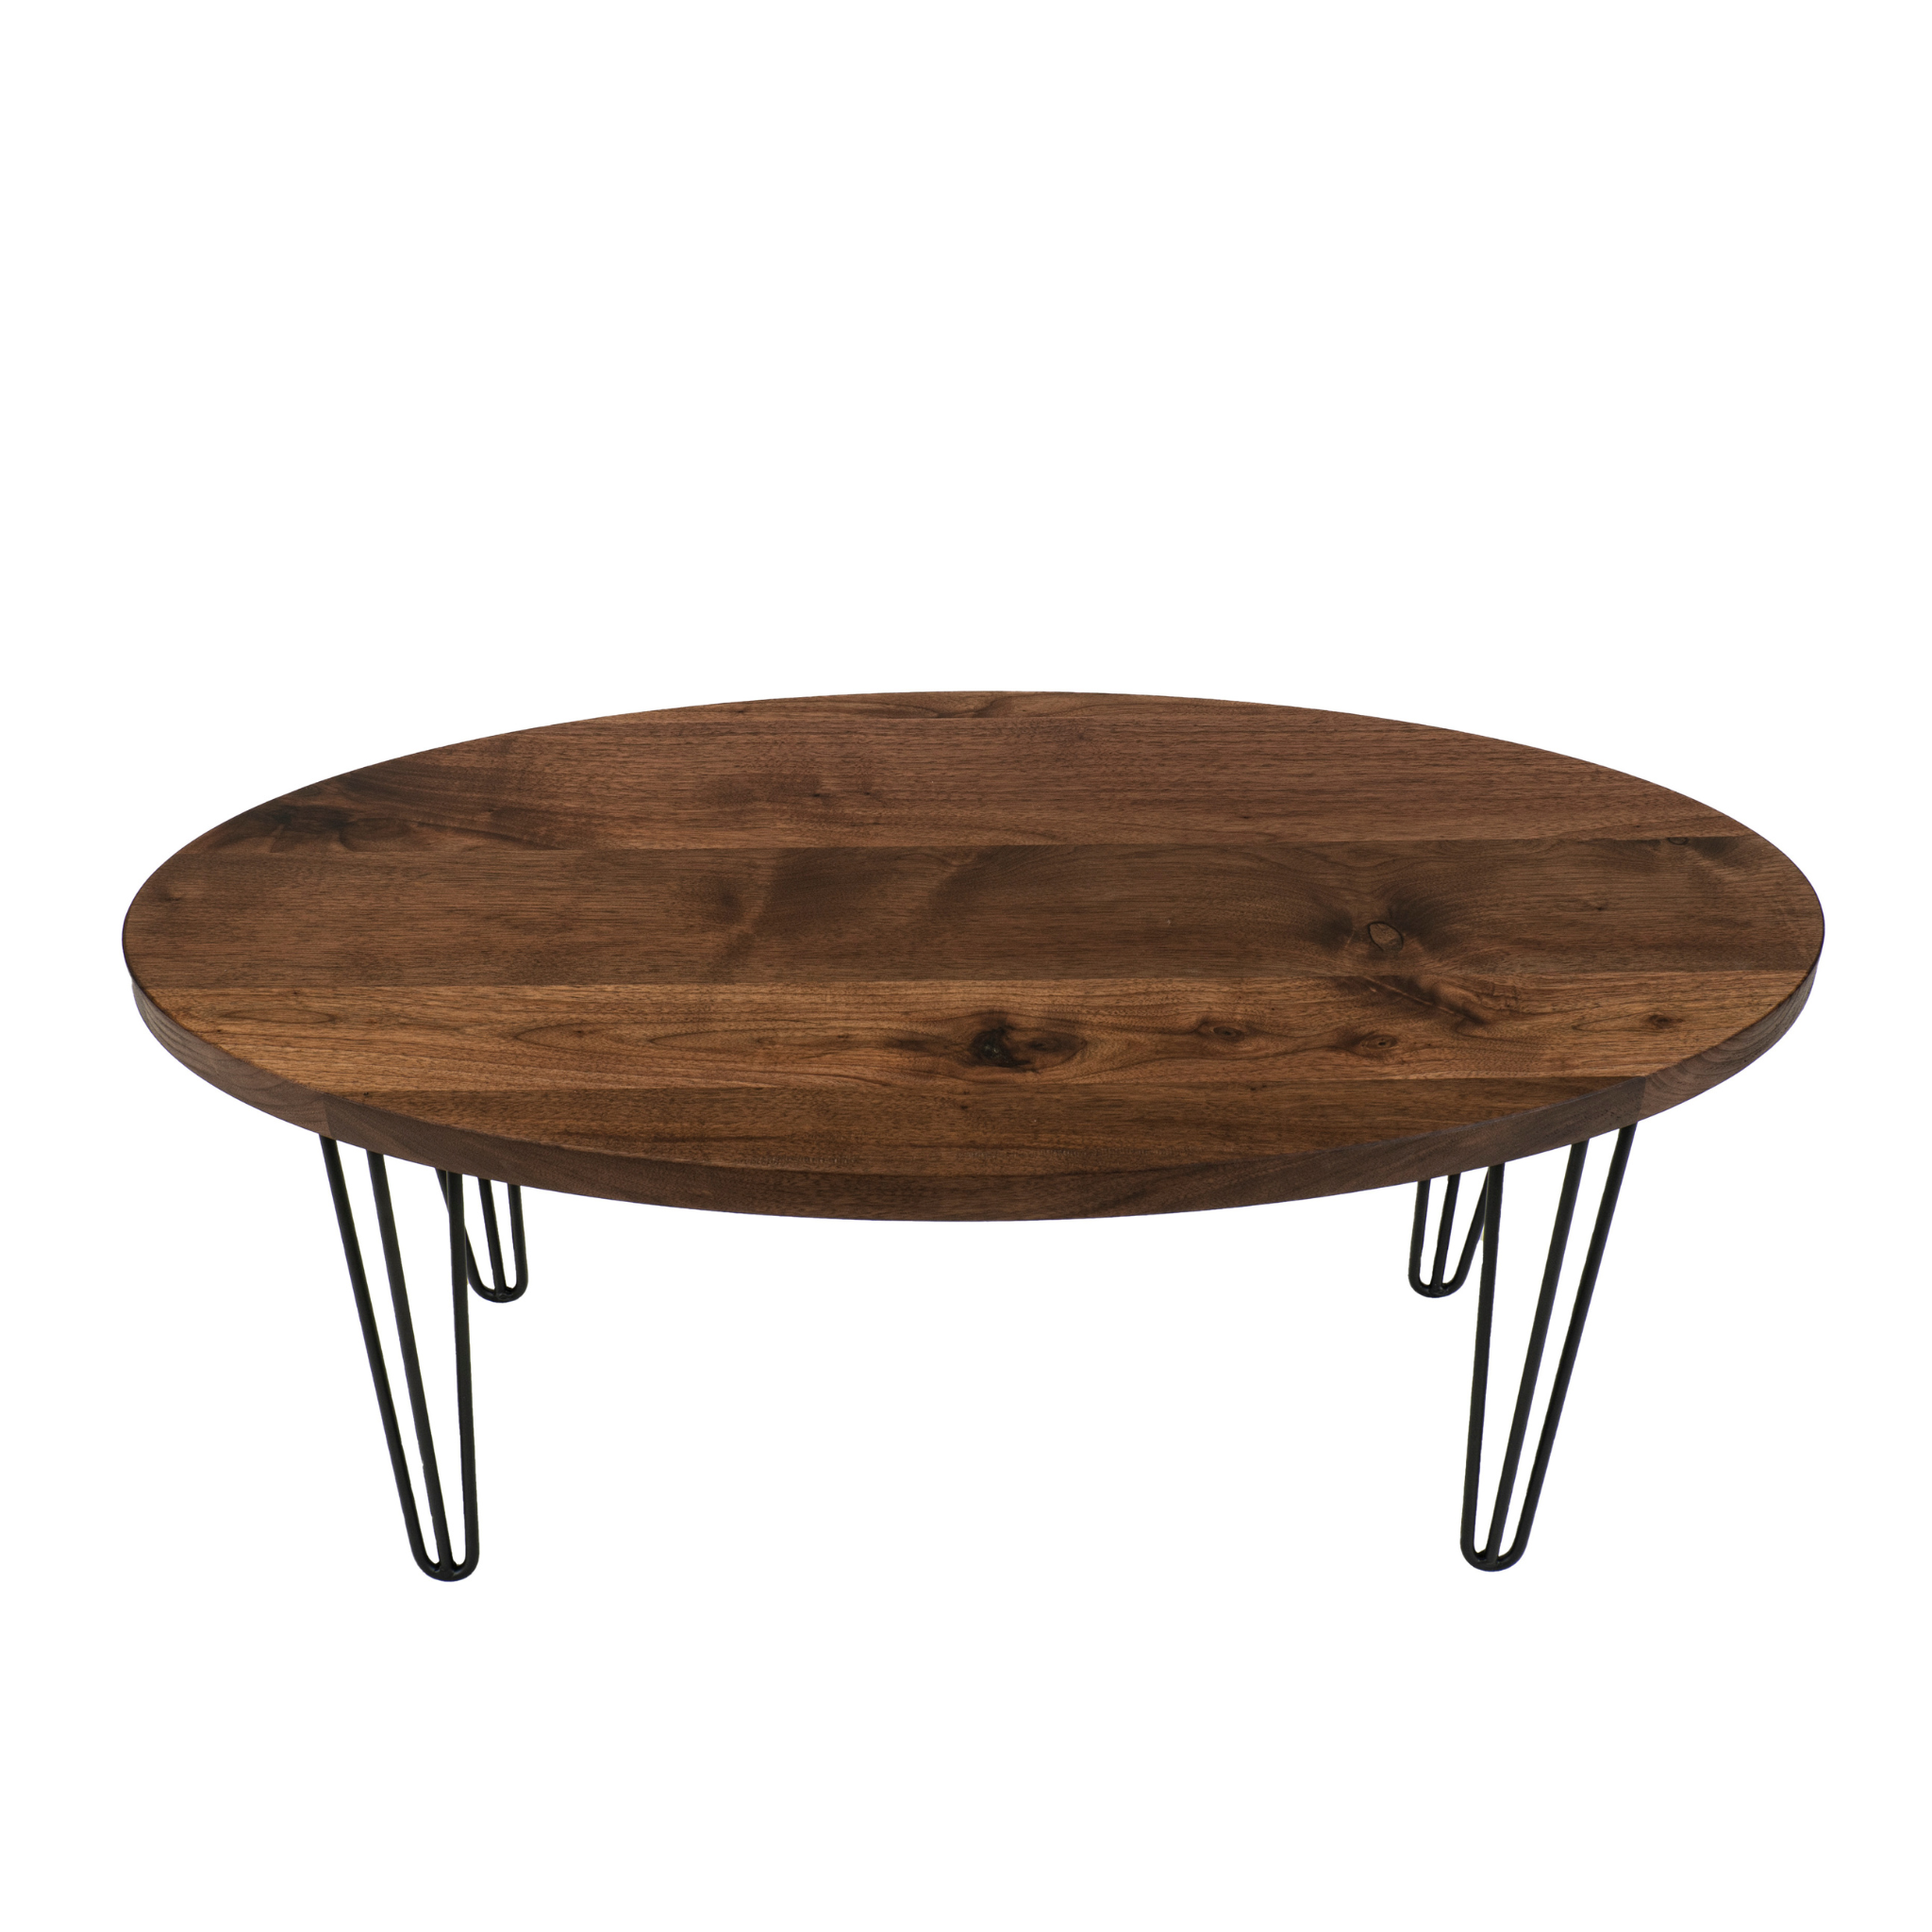 Oval coffee table for living room. Designed by Urban Industrial Design. 